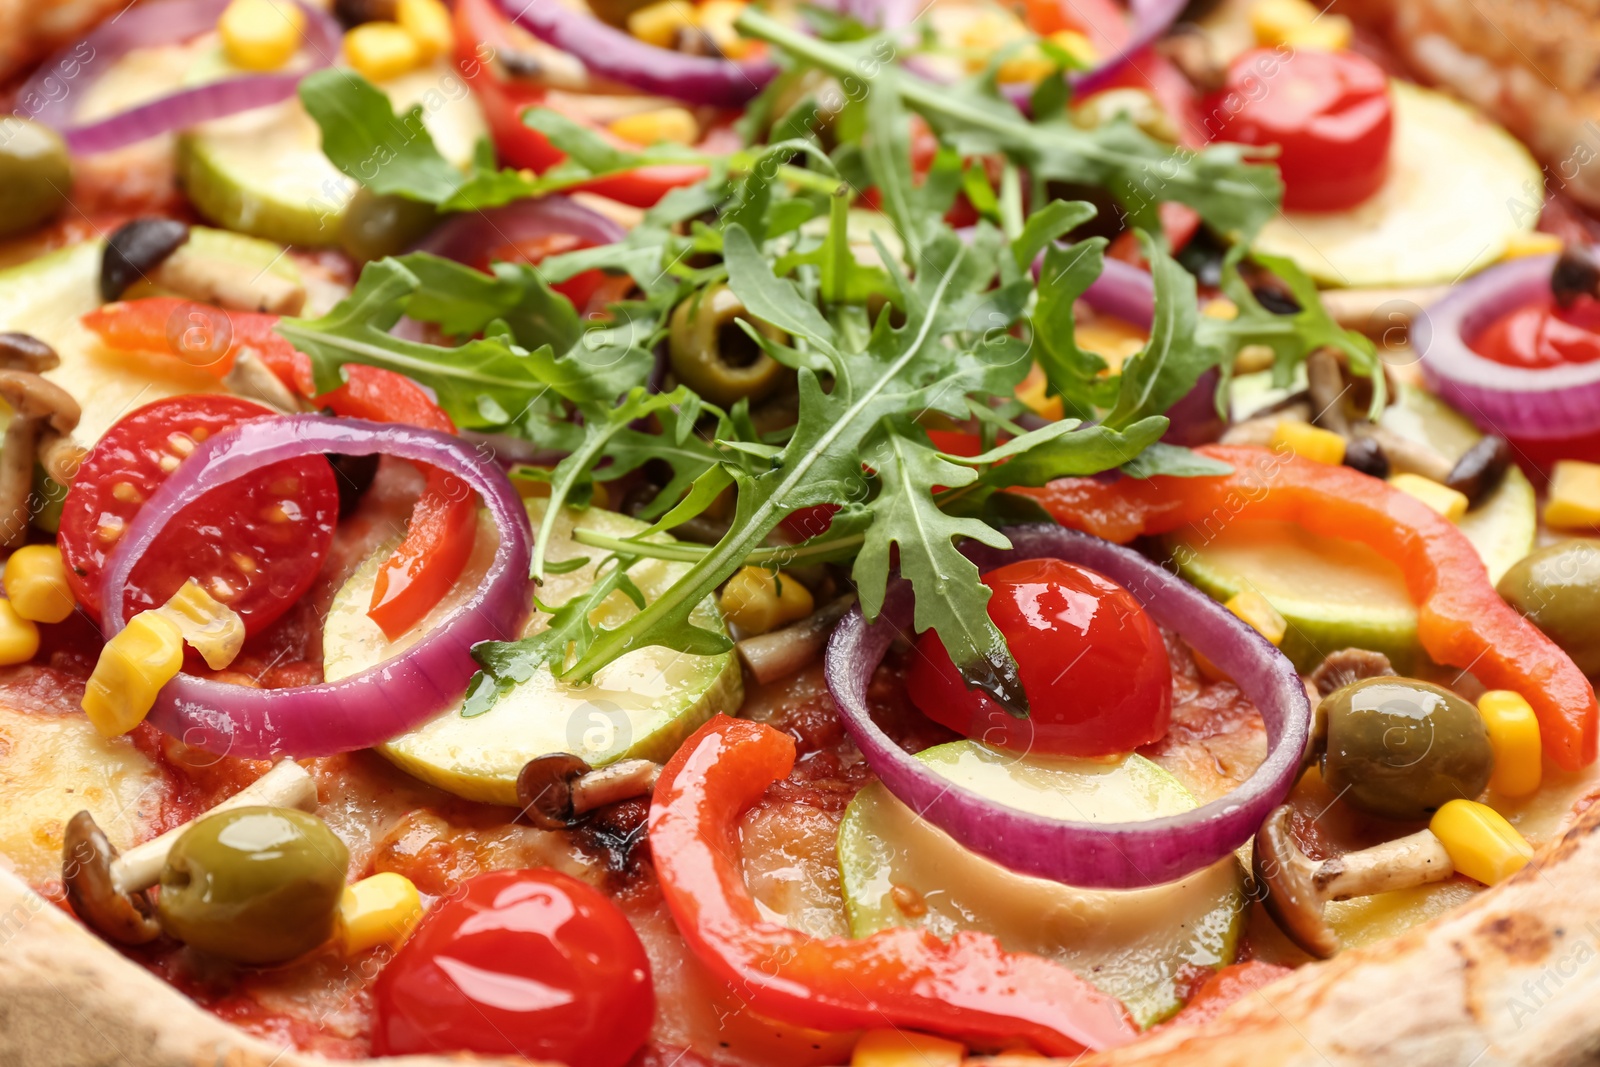 Photo of Delicious fresh vegetable pizza as background, closeup